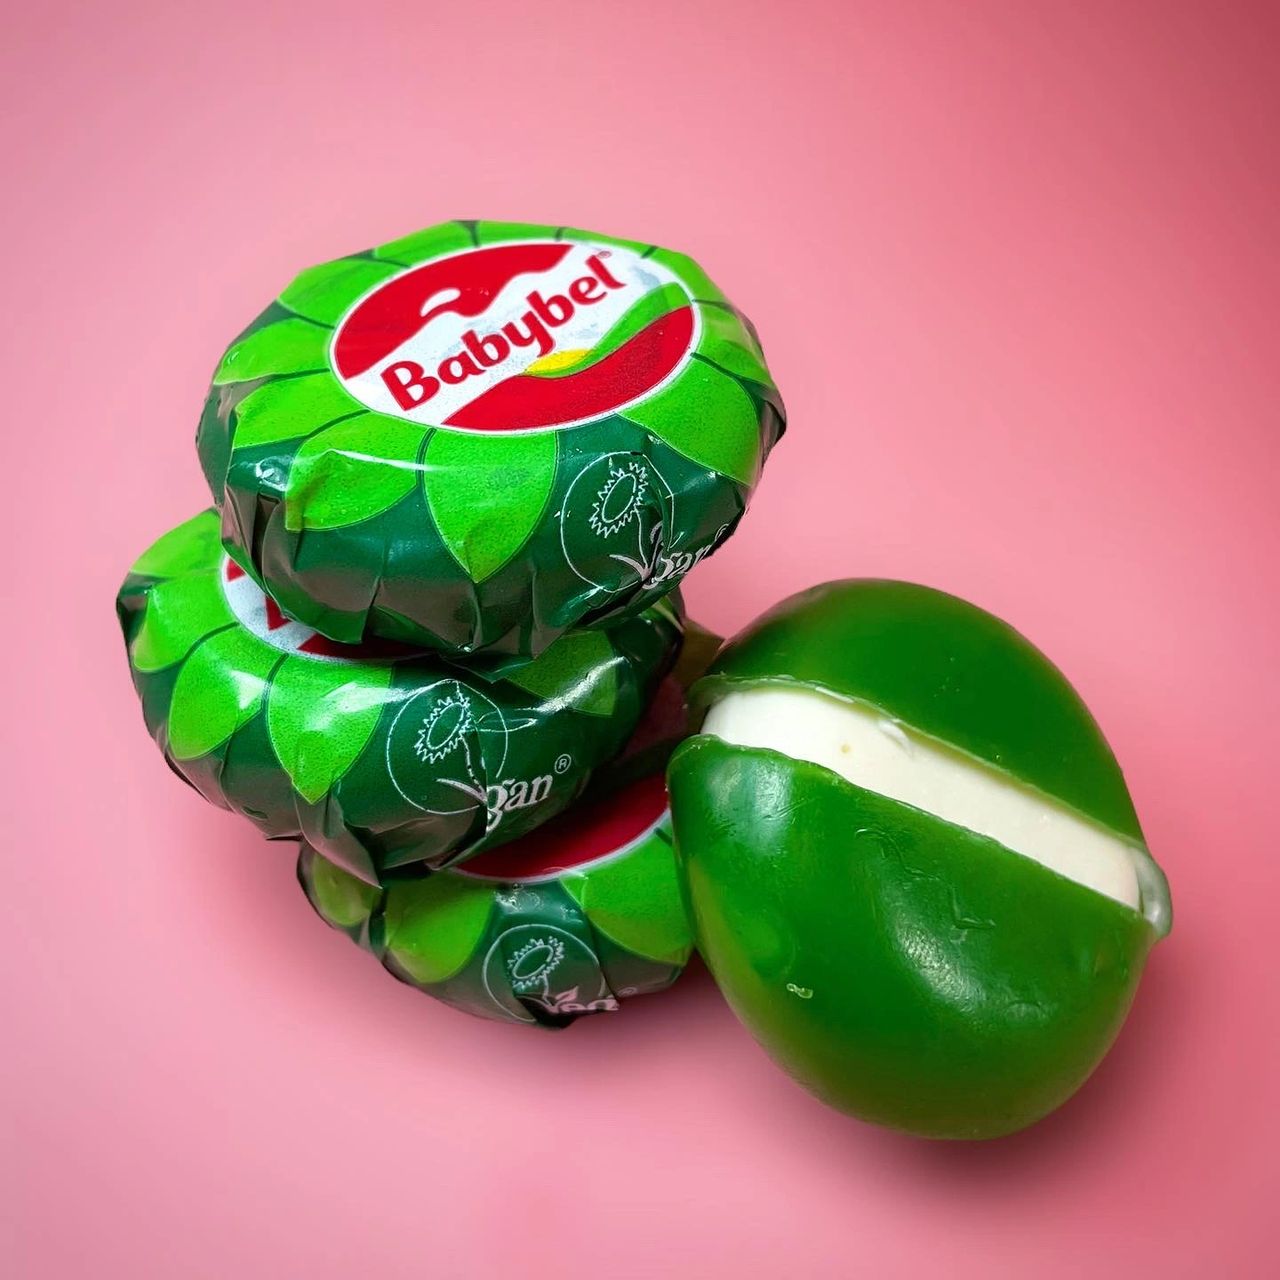 Babybel Just Launched a New Cheese for the First Time in 9 Years